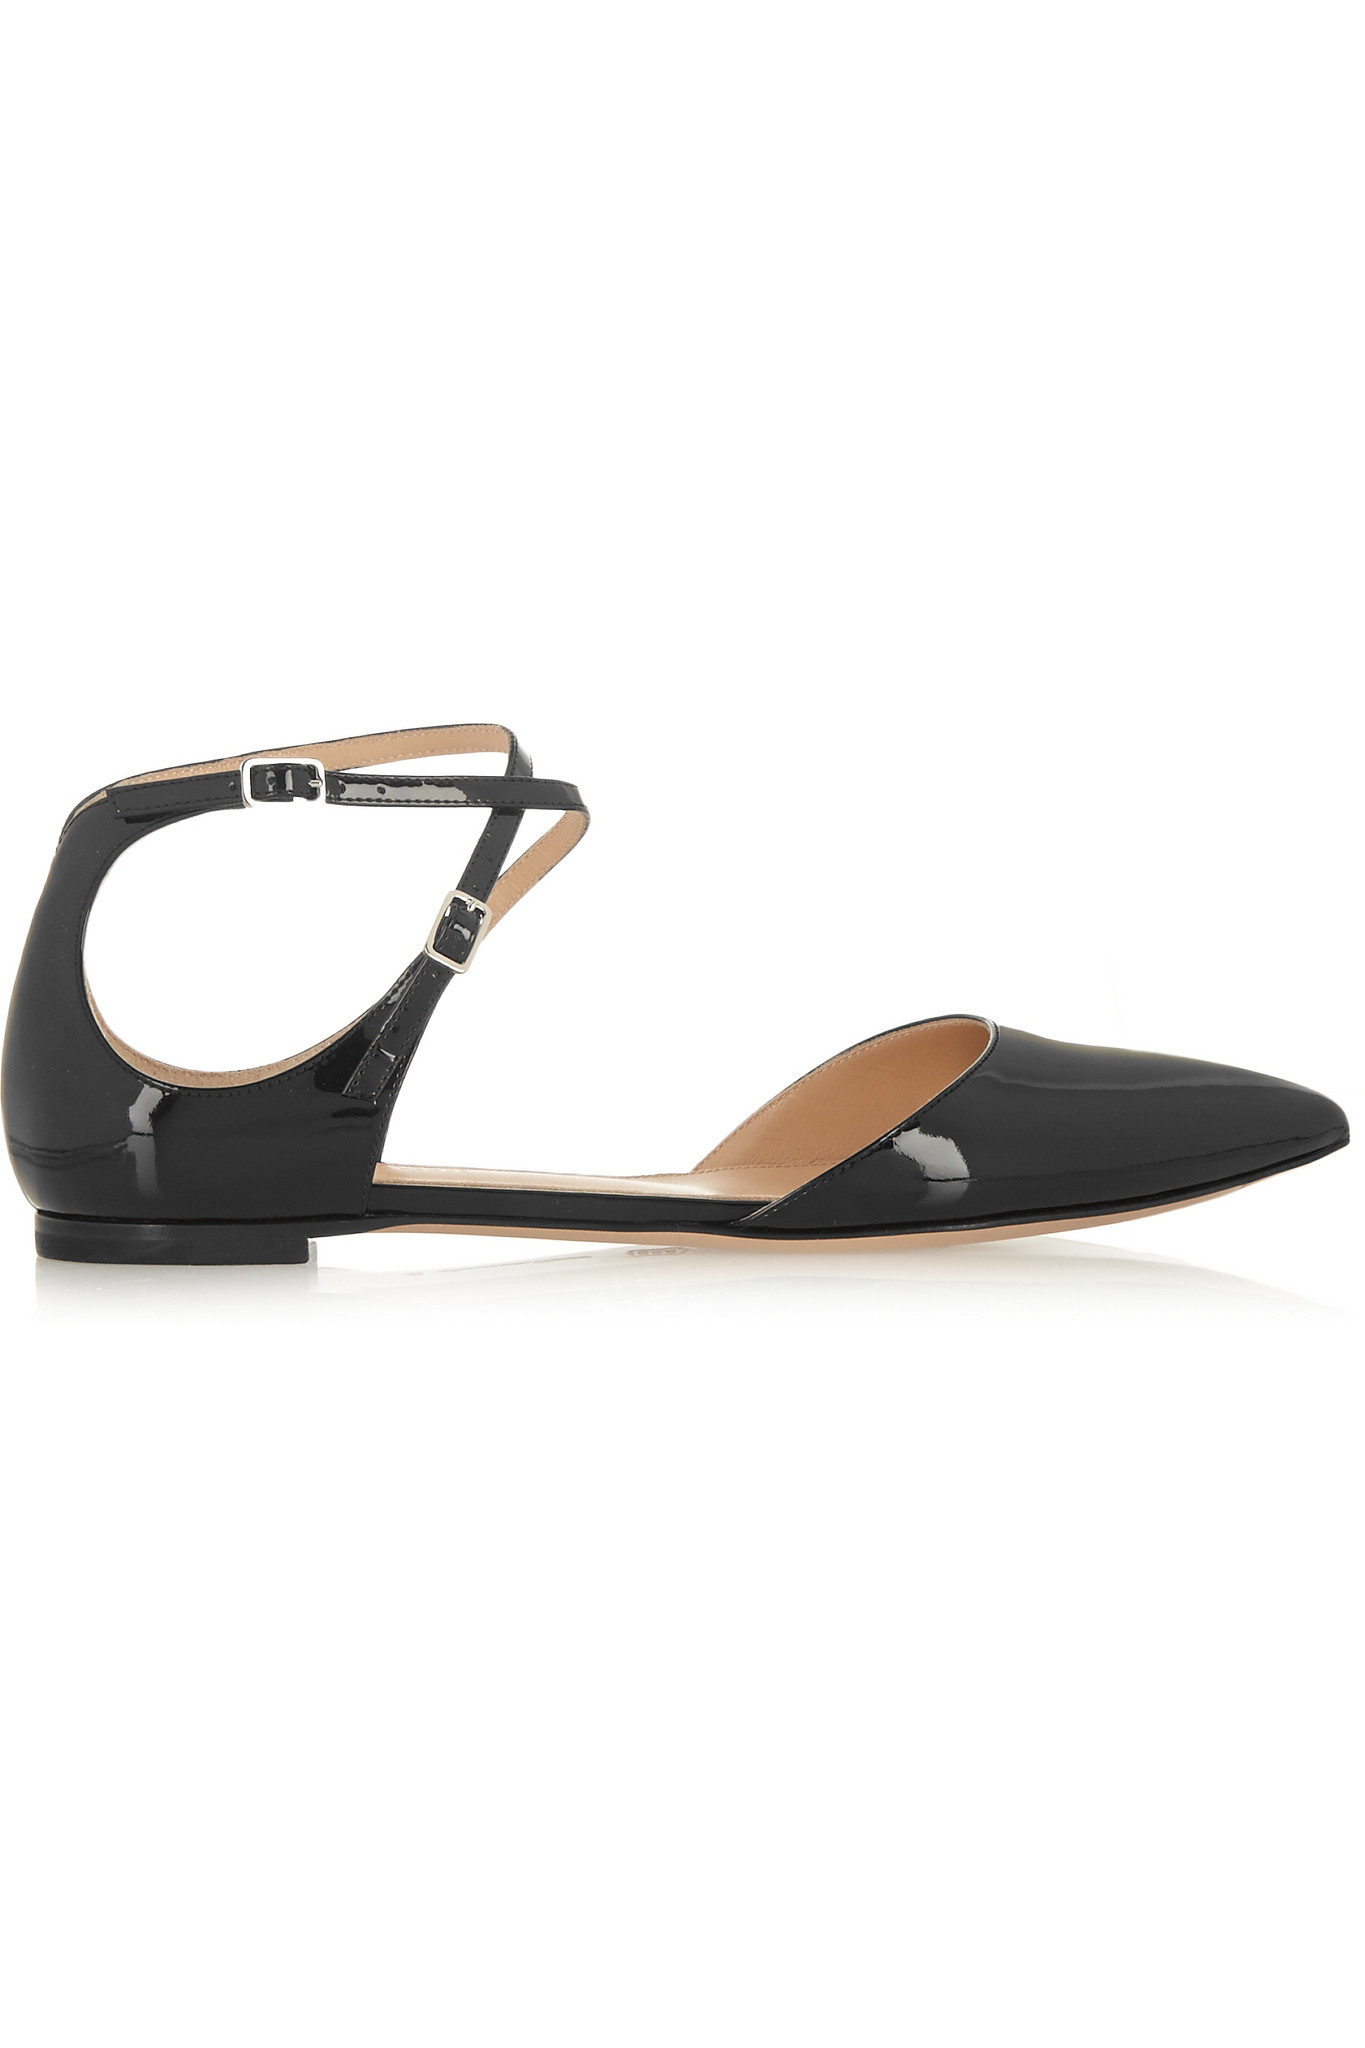 Gianvito Rossi Pointed-Toe Patent-Leather Flats in Black - Lyst